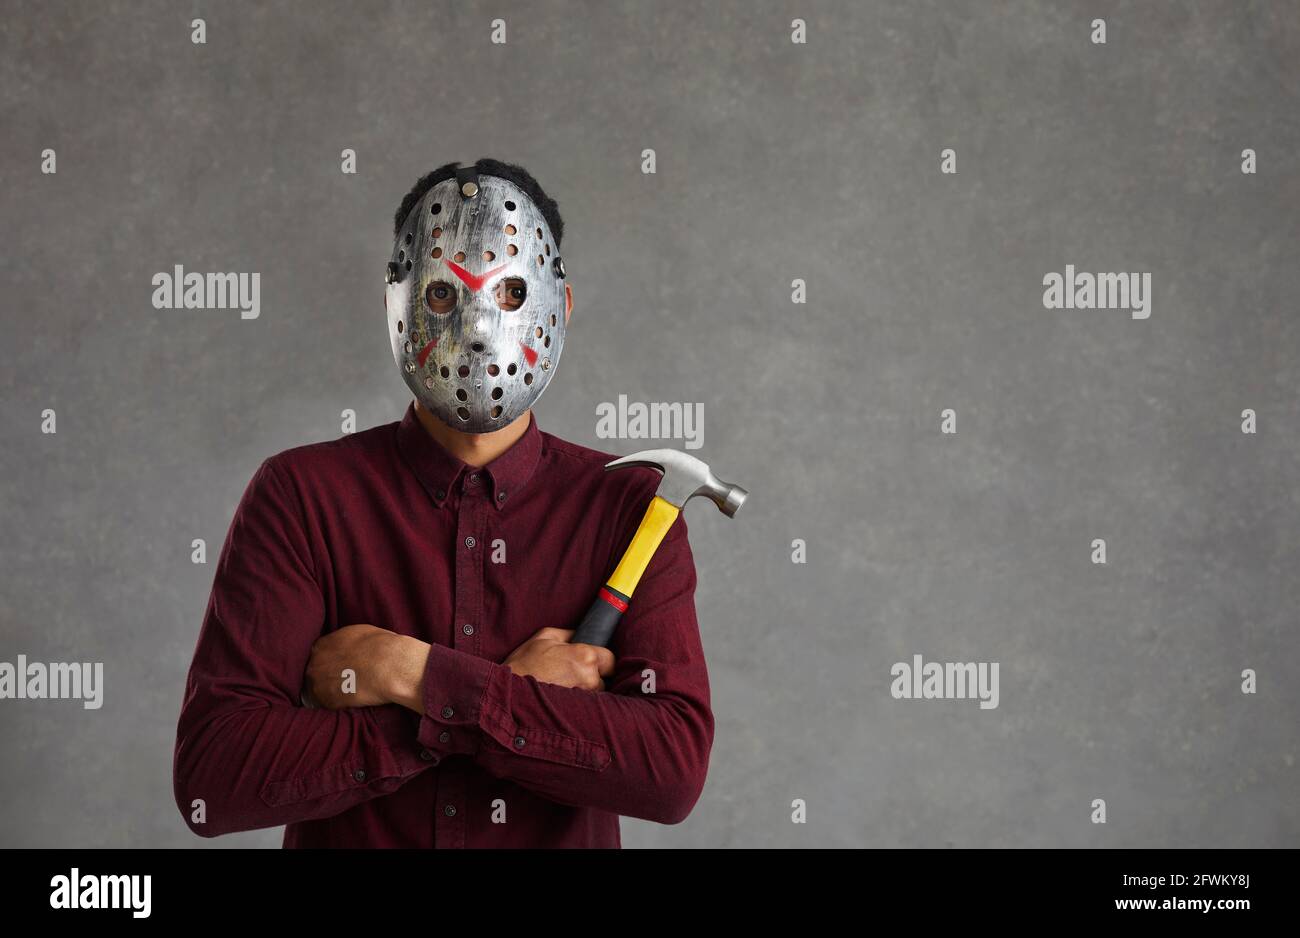 Studio portrait of an unknown man on a gray background who is dressed in a spooky maniac mask. Stock Photo